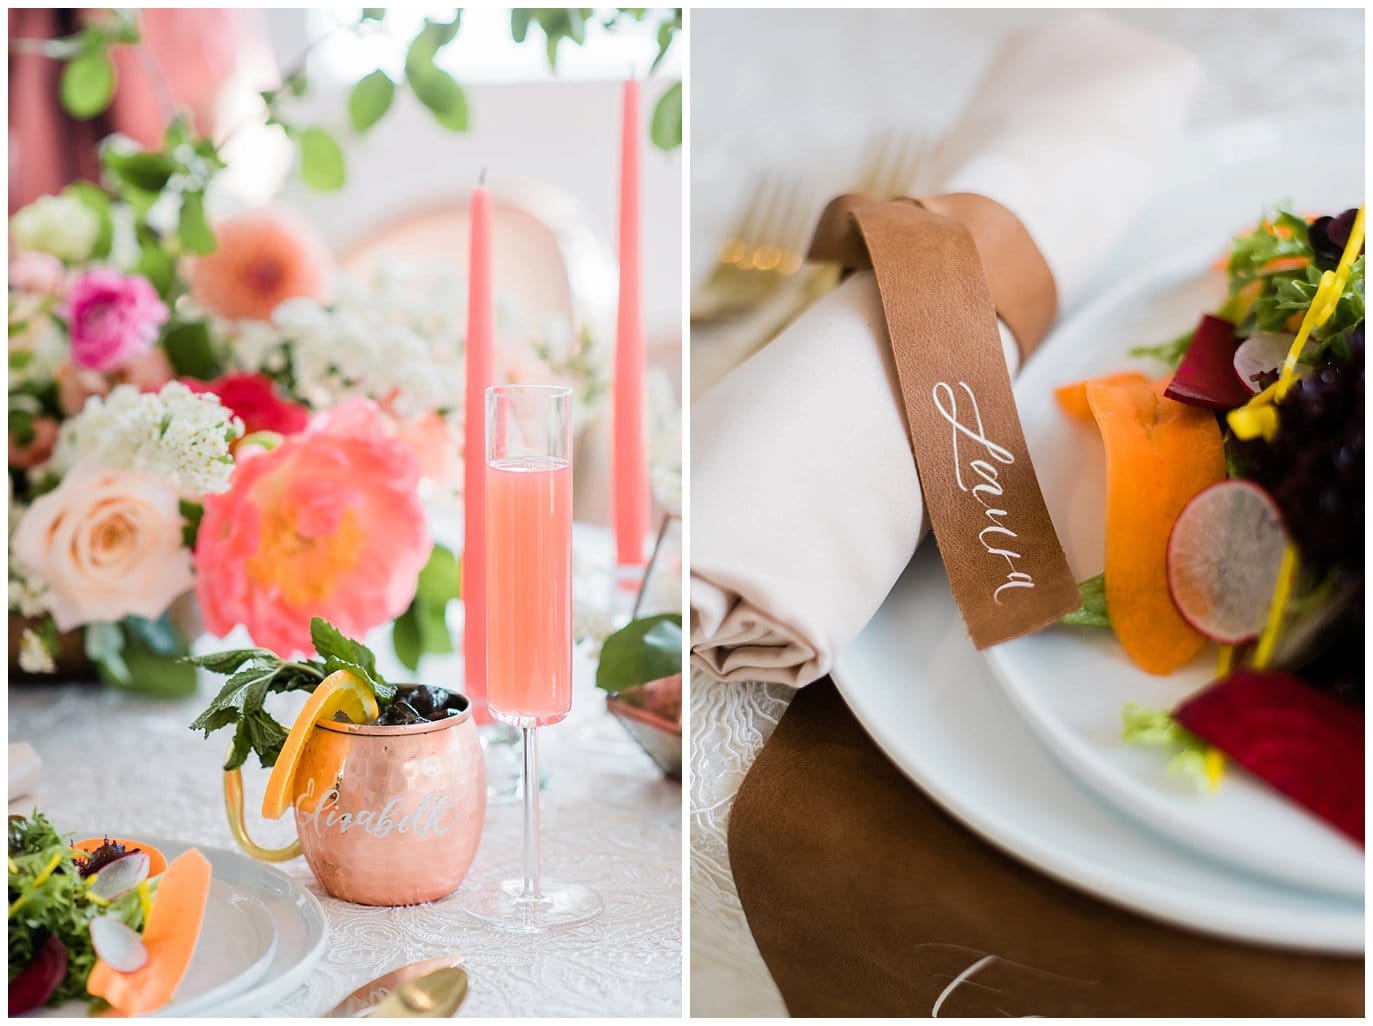 leather napkin rings and copper mugs wedding inspiration at summer blanc wedding by Denver wedding photographer Jennie Crate photographer